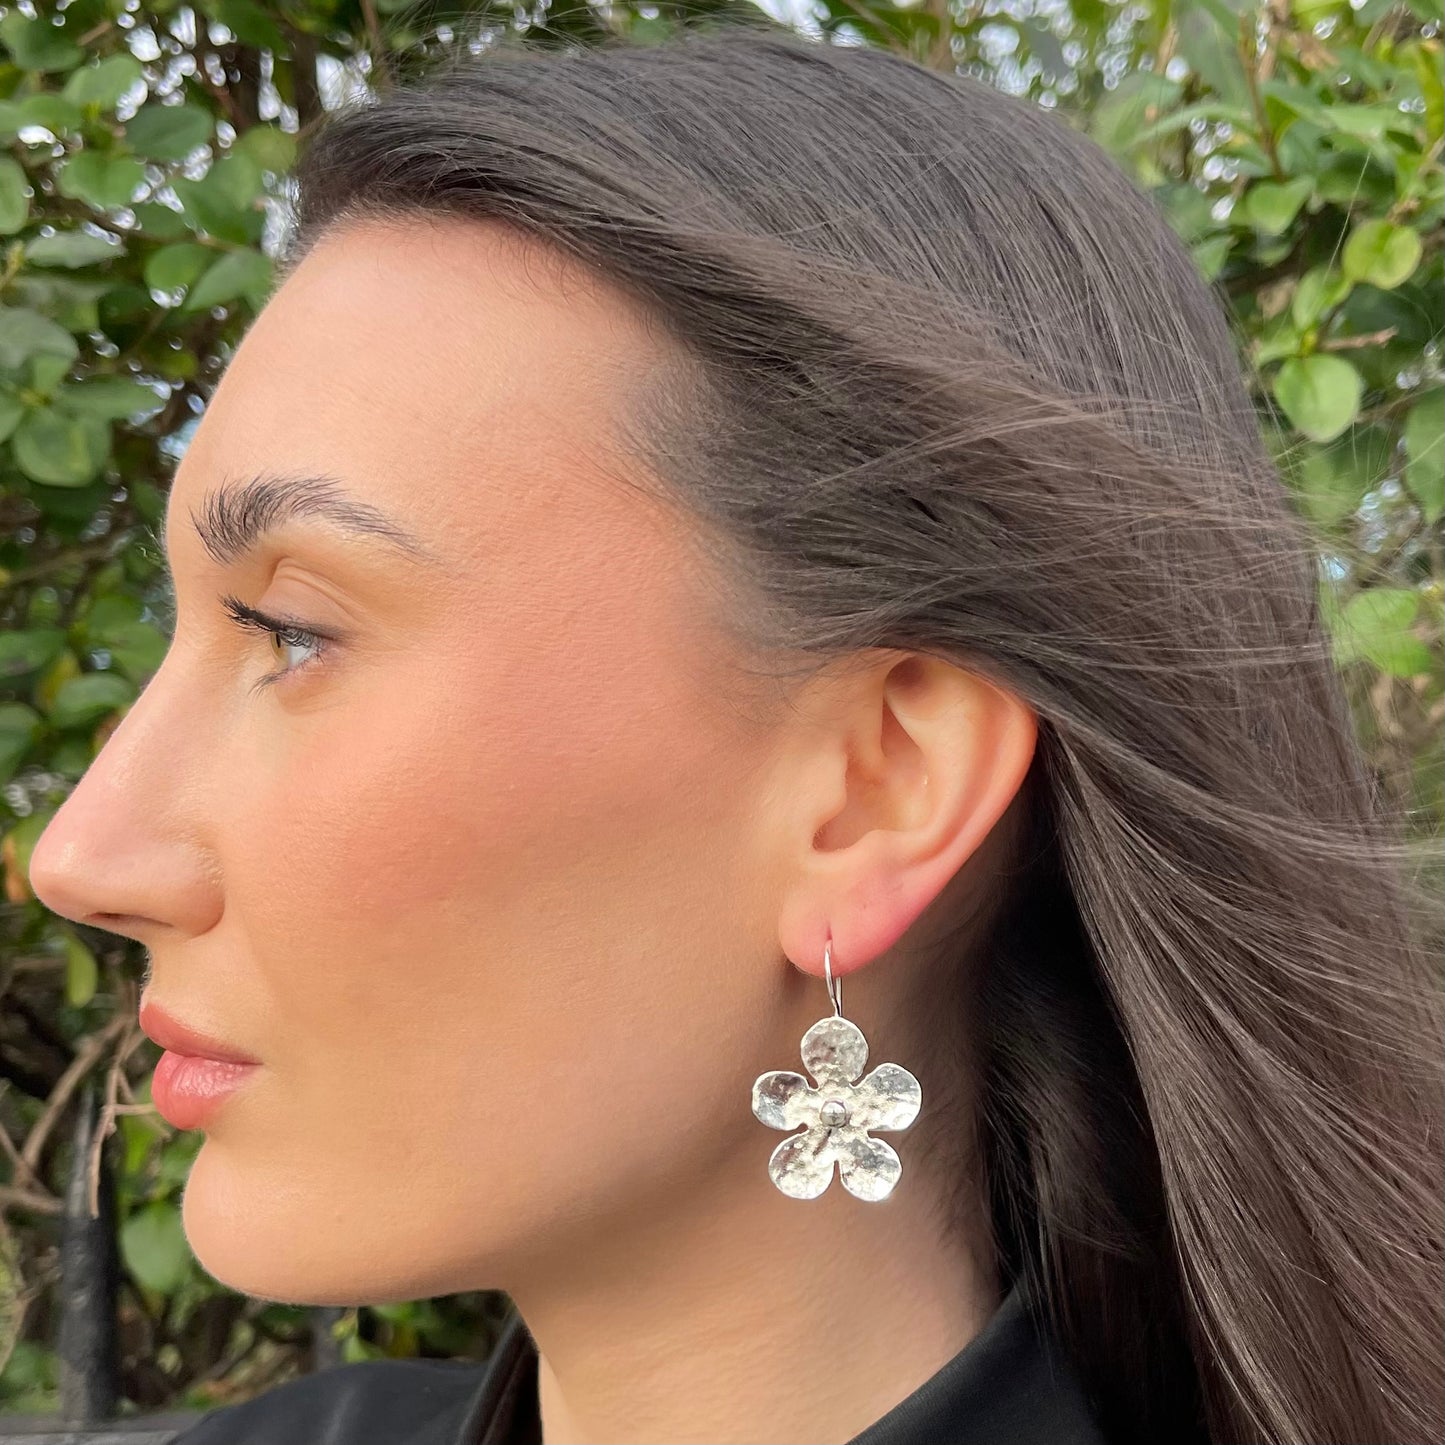 Silver Large Hammered Daisy Earrings